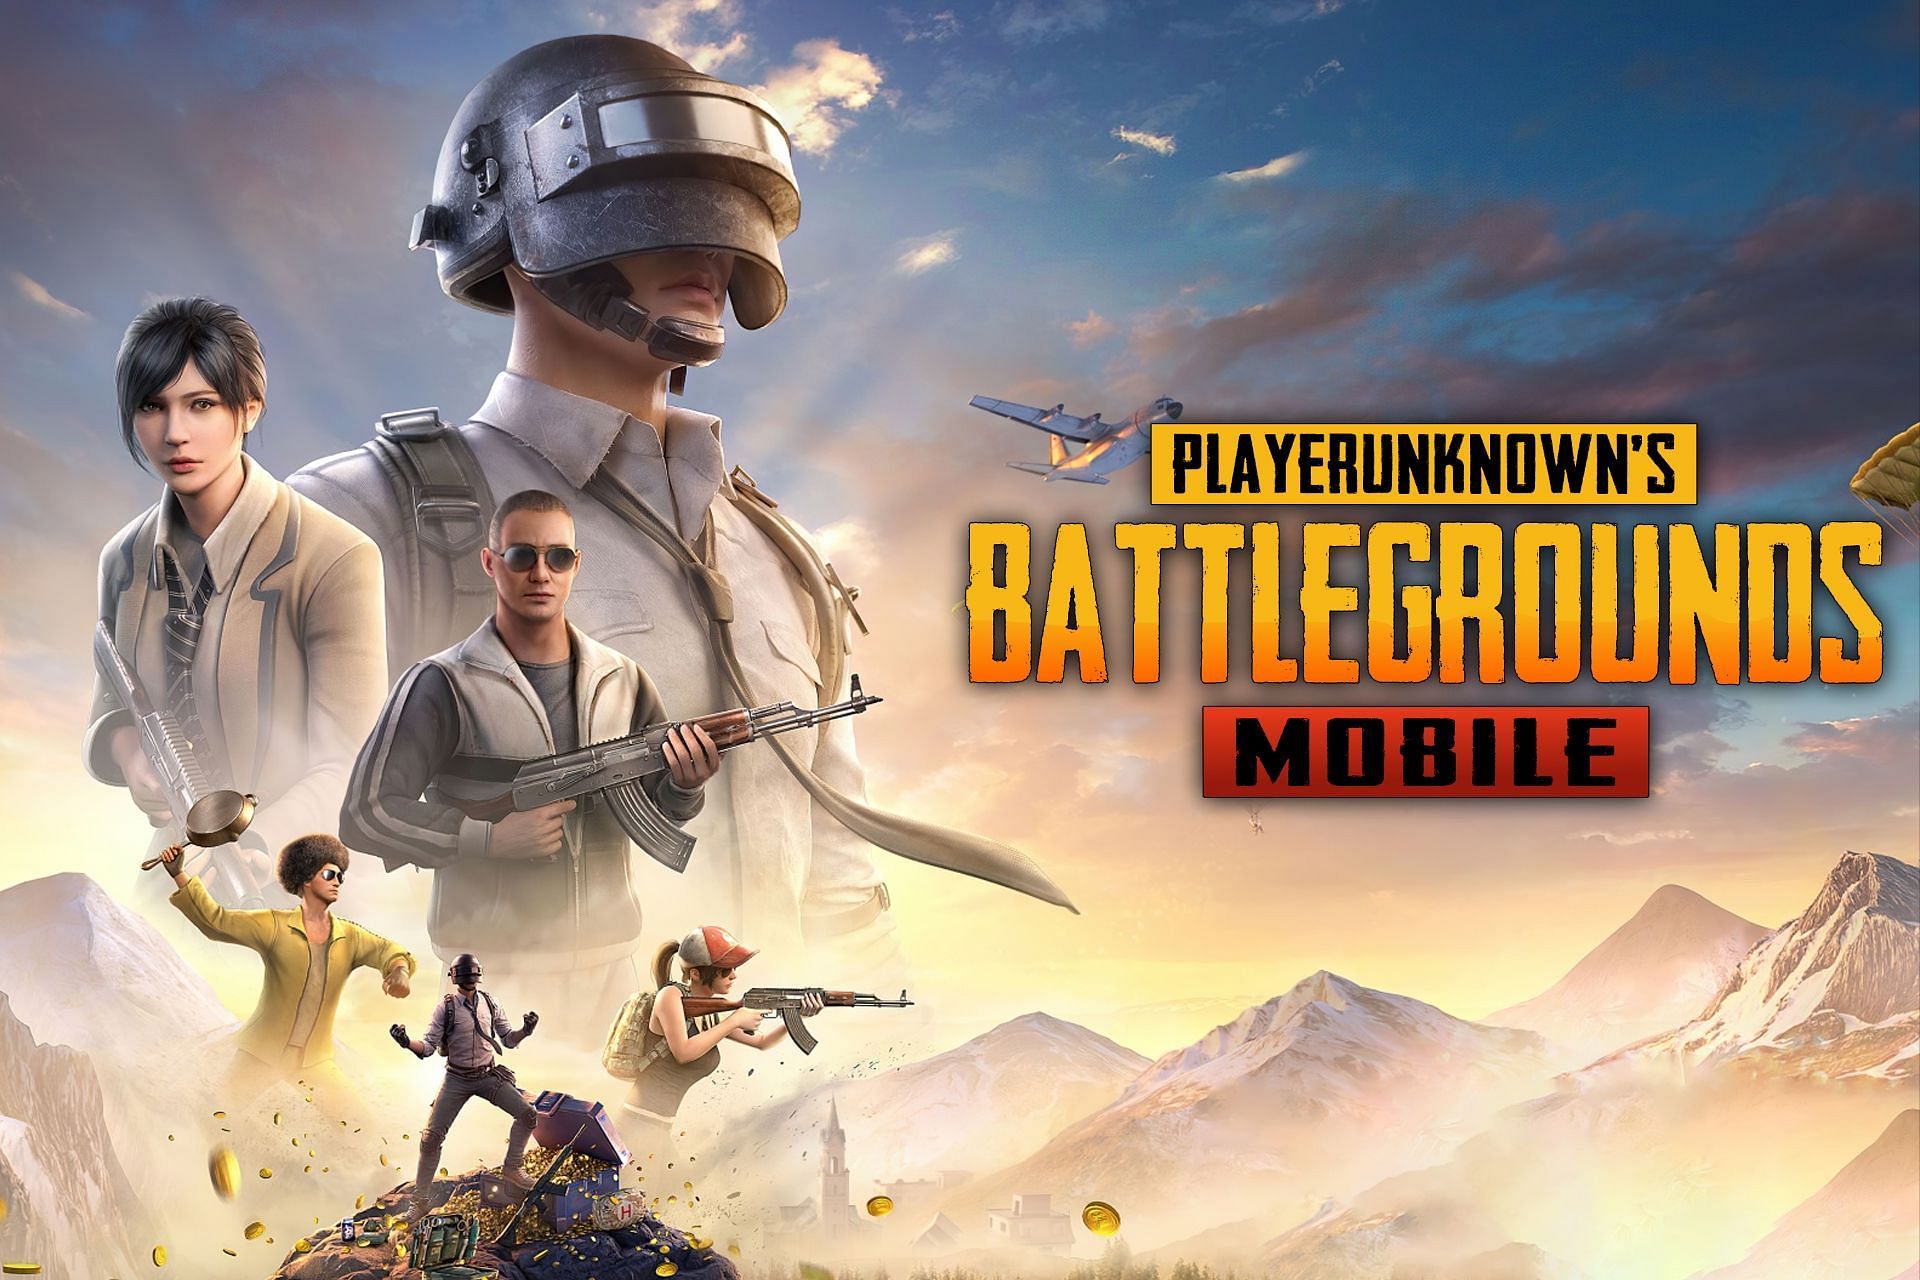 Taliban bans PUBG Mobile for promoting violent in the country (Image via Sportskeeda)